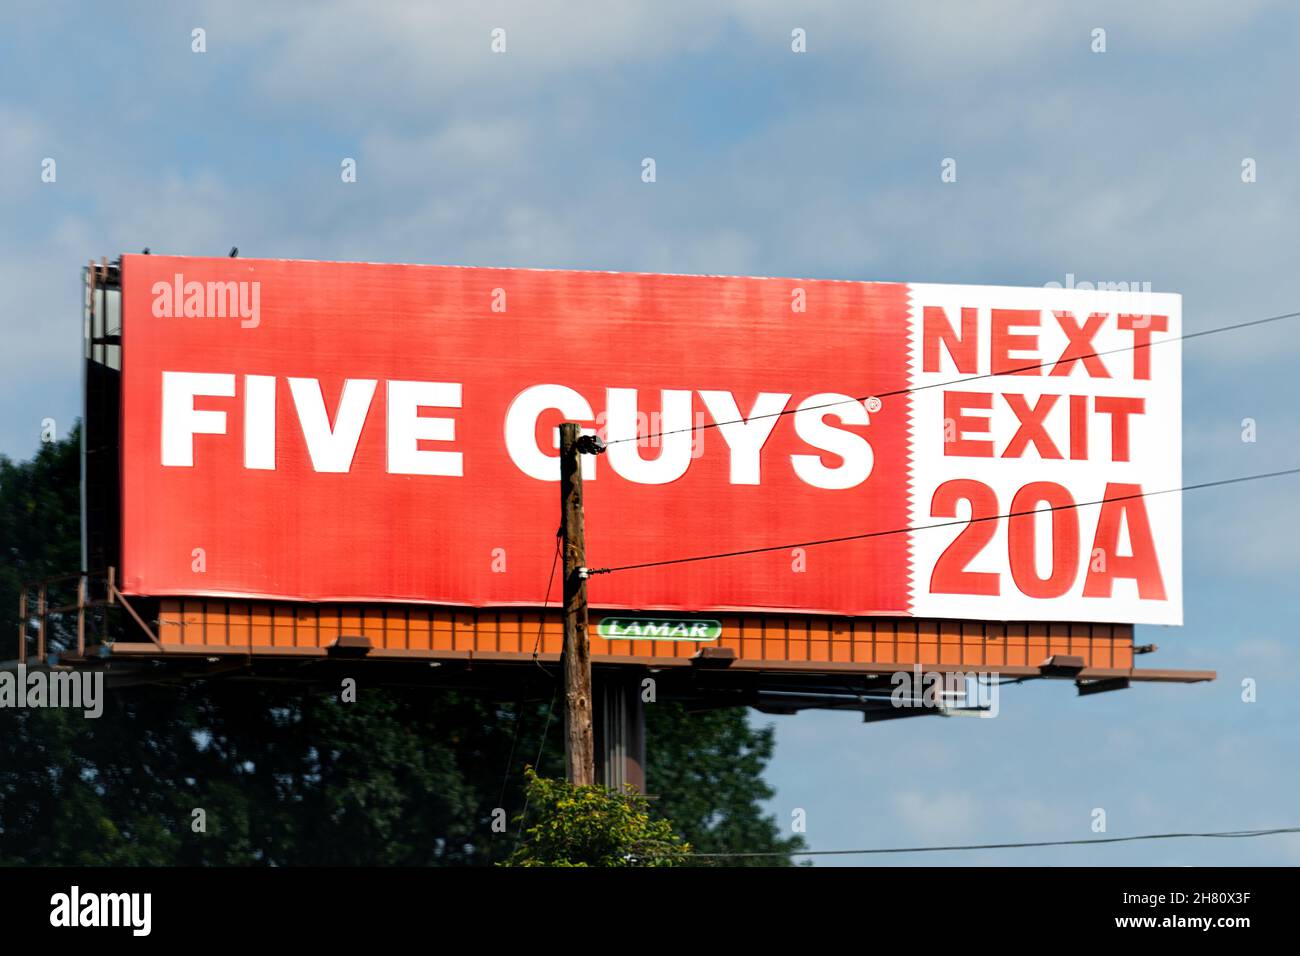 Johnson City, USA - June 23, 2021: Tennessee Johnson city with advertisement sign for Five Guys burger fast food restaurant on highway exit interstate Stock Photo